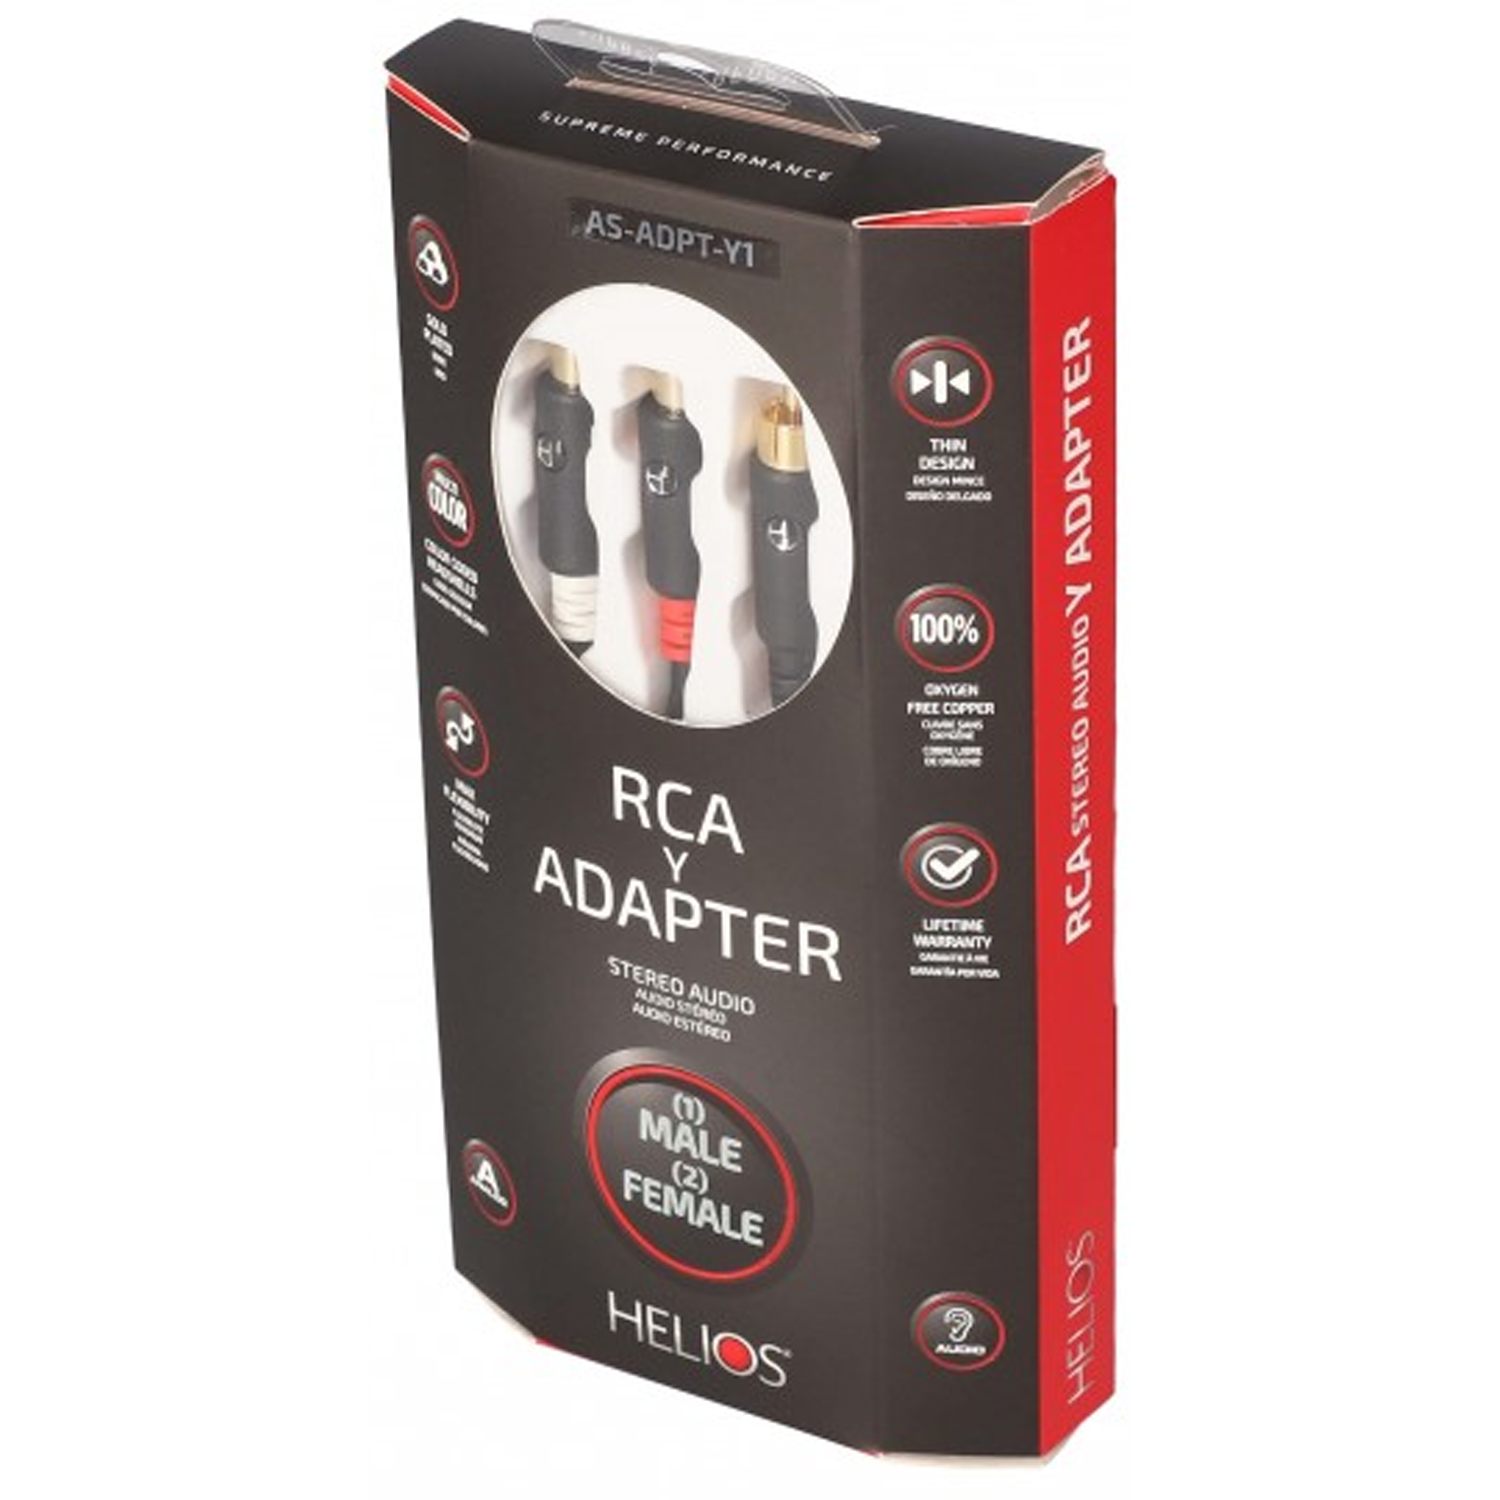 ETHEREAL AS-ADPT-Y1 1 RCA Male to 2 Female RCA Y cable splitter